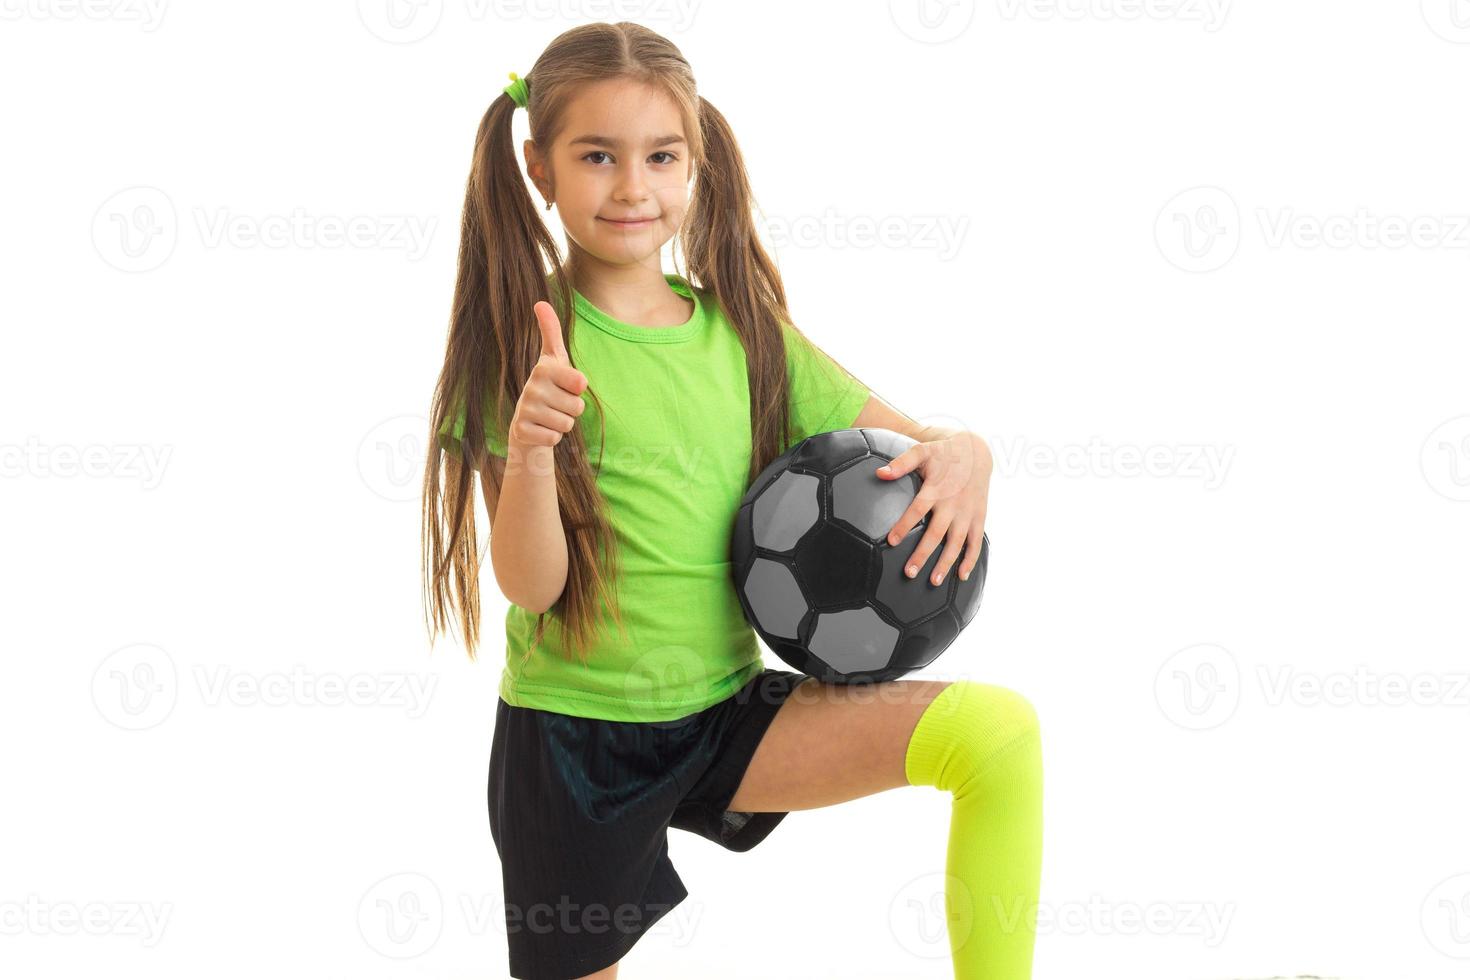 little girl in sports uniform with soccer ball in hands shows thumbs up photo